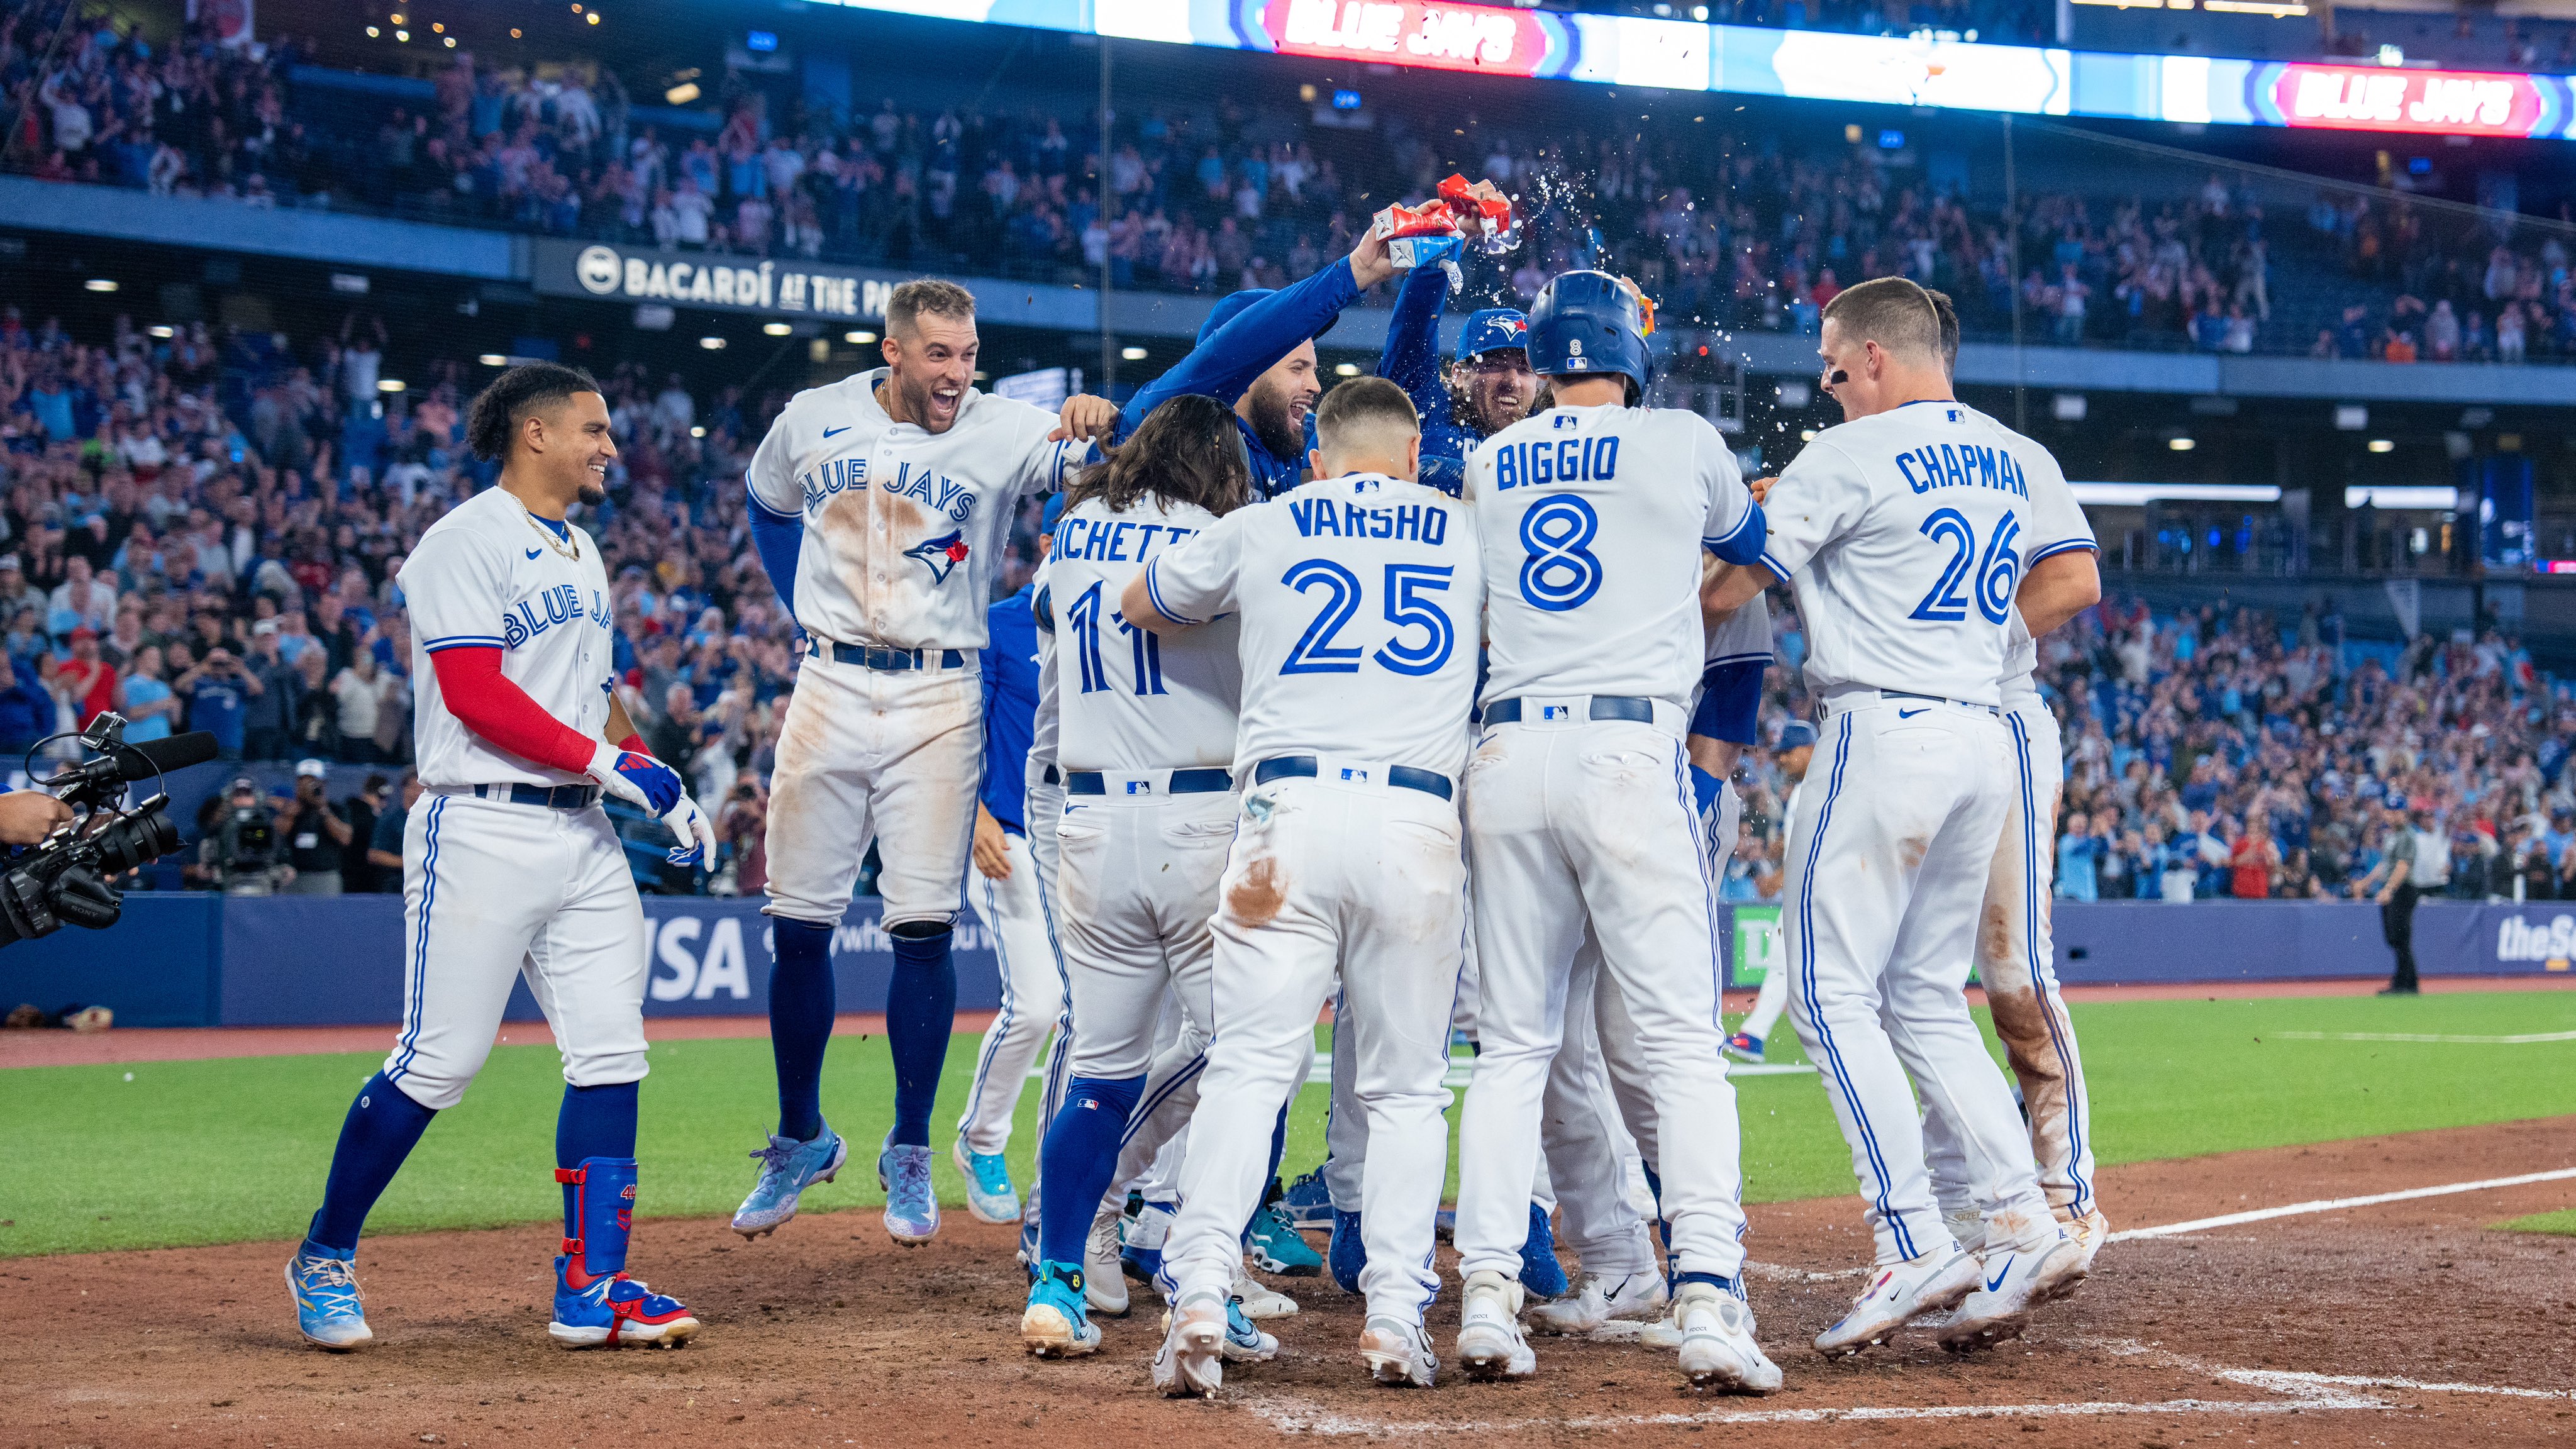 Blue Jays beat Yankees 3-0 after 10 innings